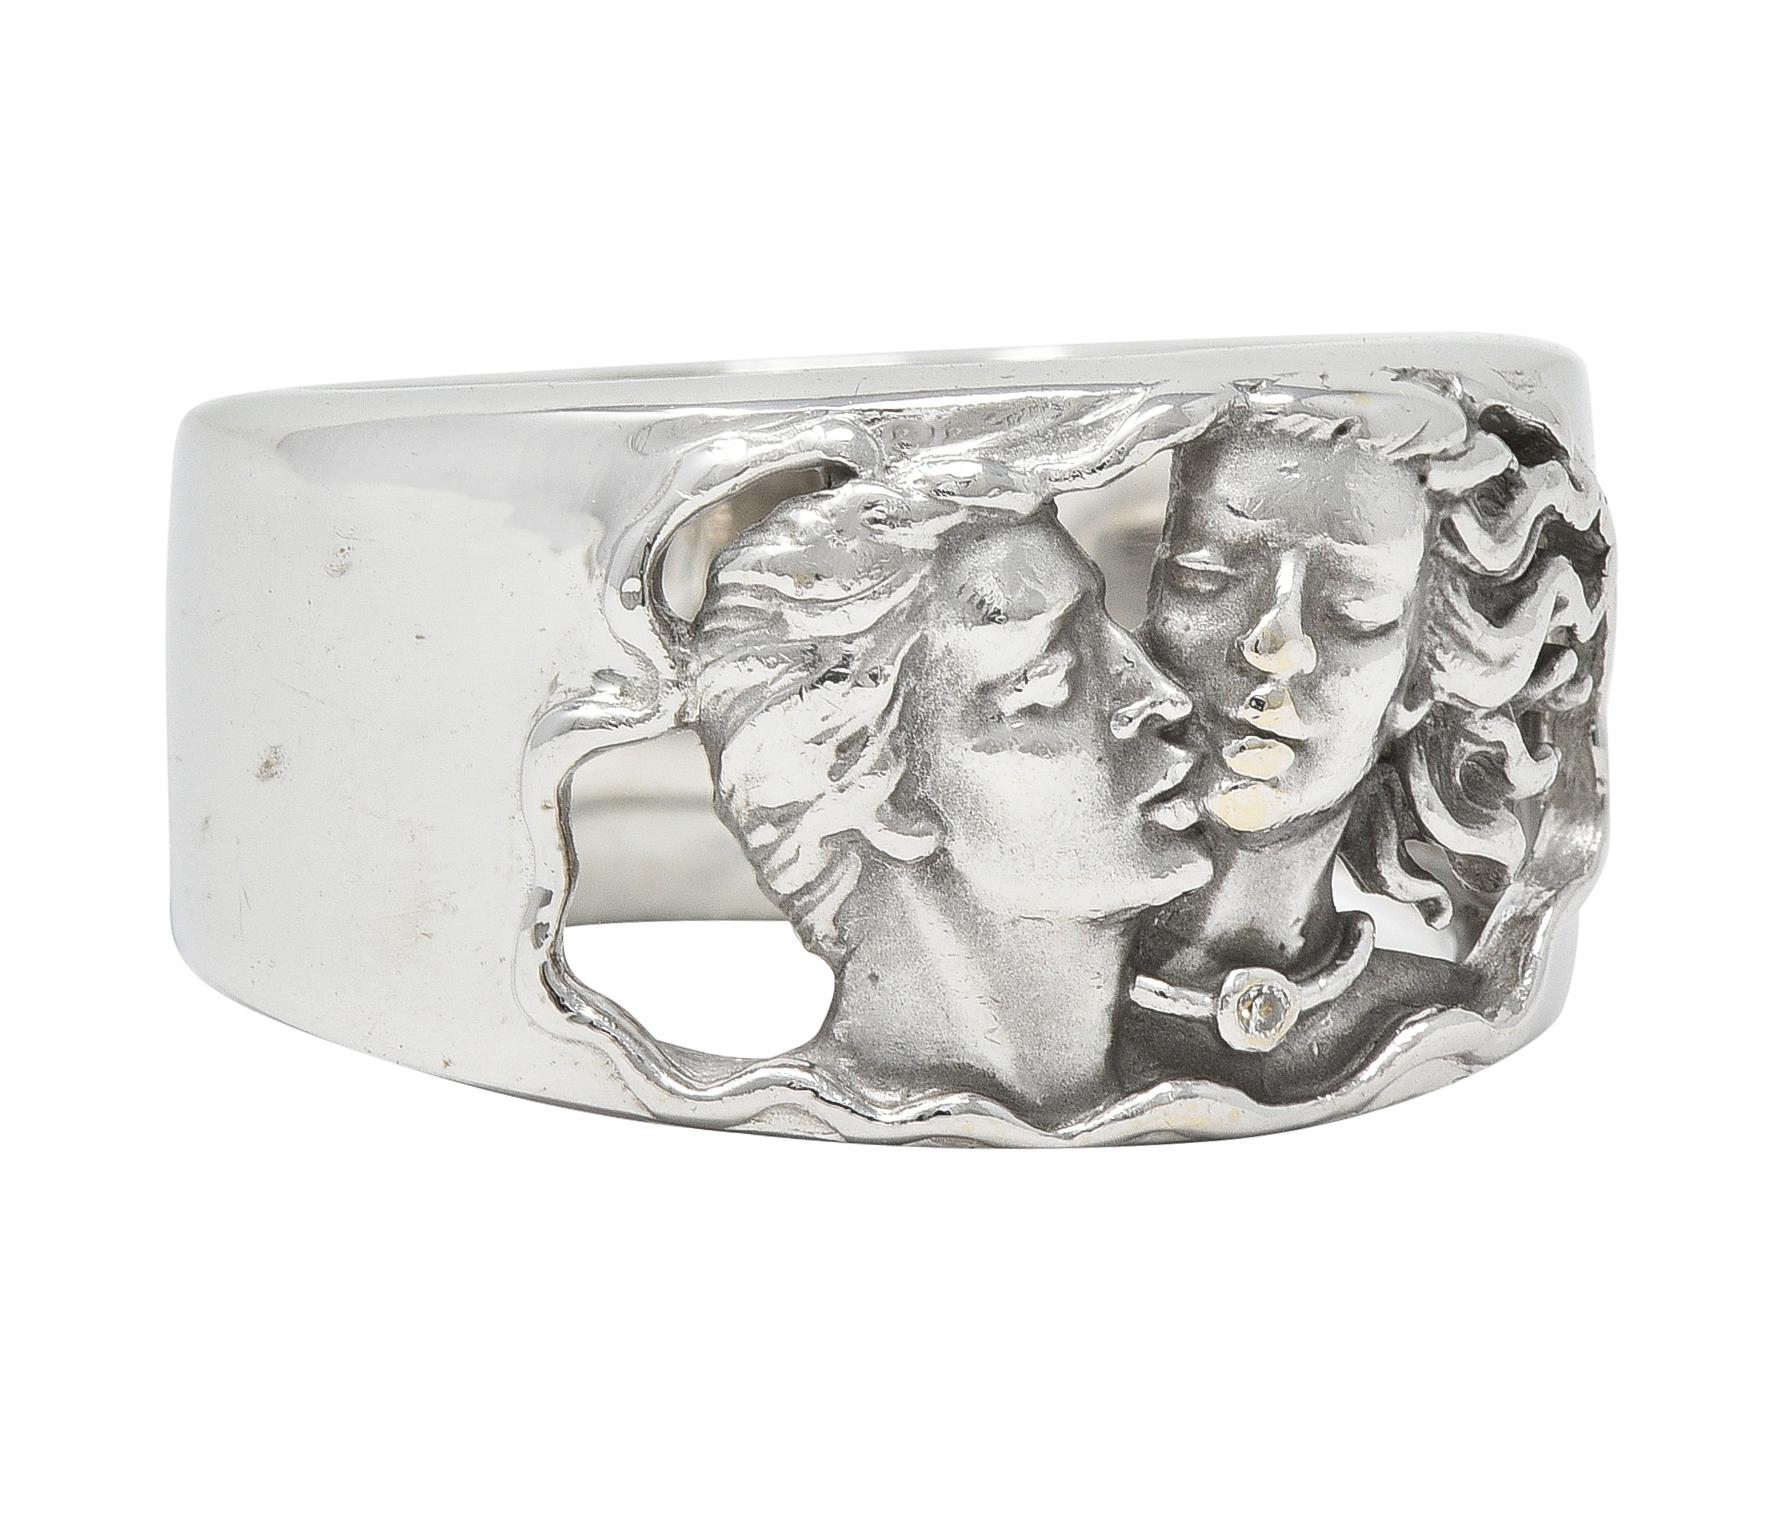 Wide band ring is pierced to front with a depiction of Adam affectionately kissing Eve
Highly rendered with a round brilliant cut diamond accent
Tested as 18 karat gold
Numbered with maker's mark
From the contemporary Adam & Eve collection
Ring